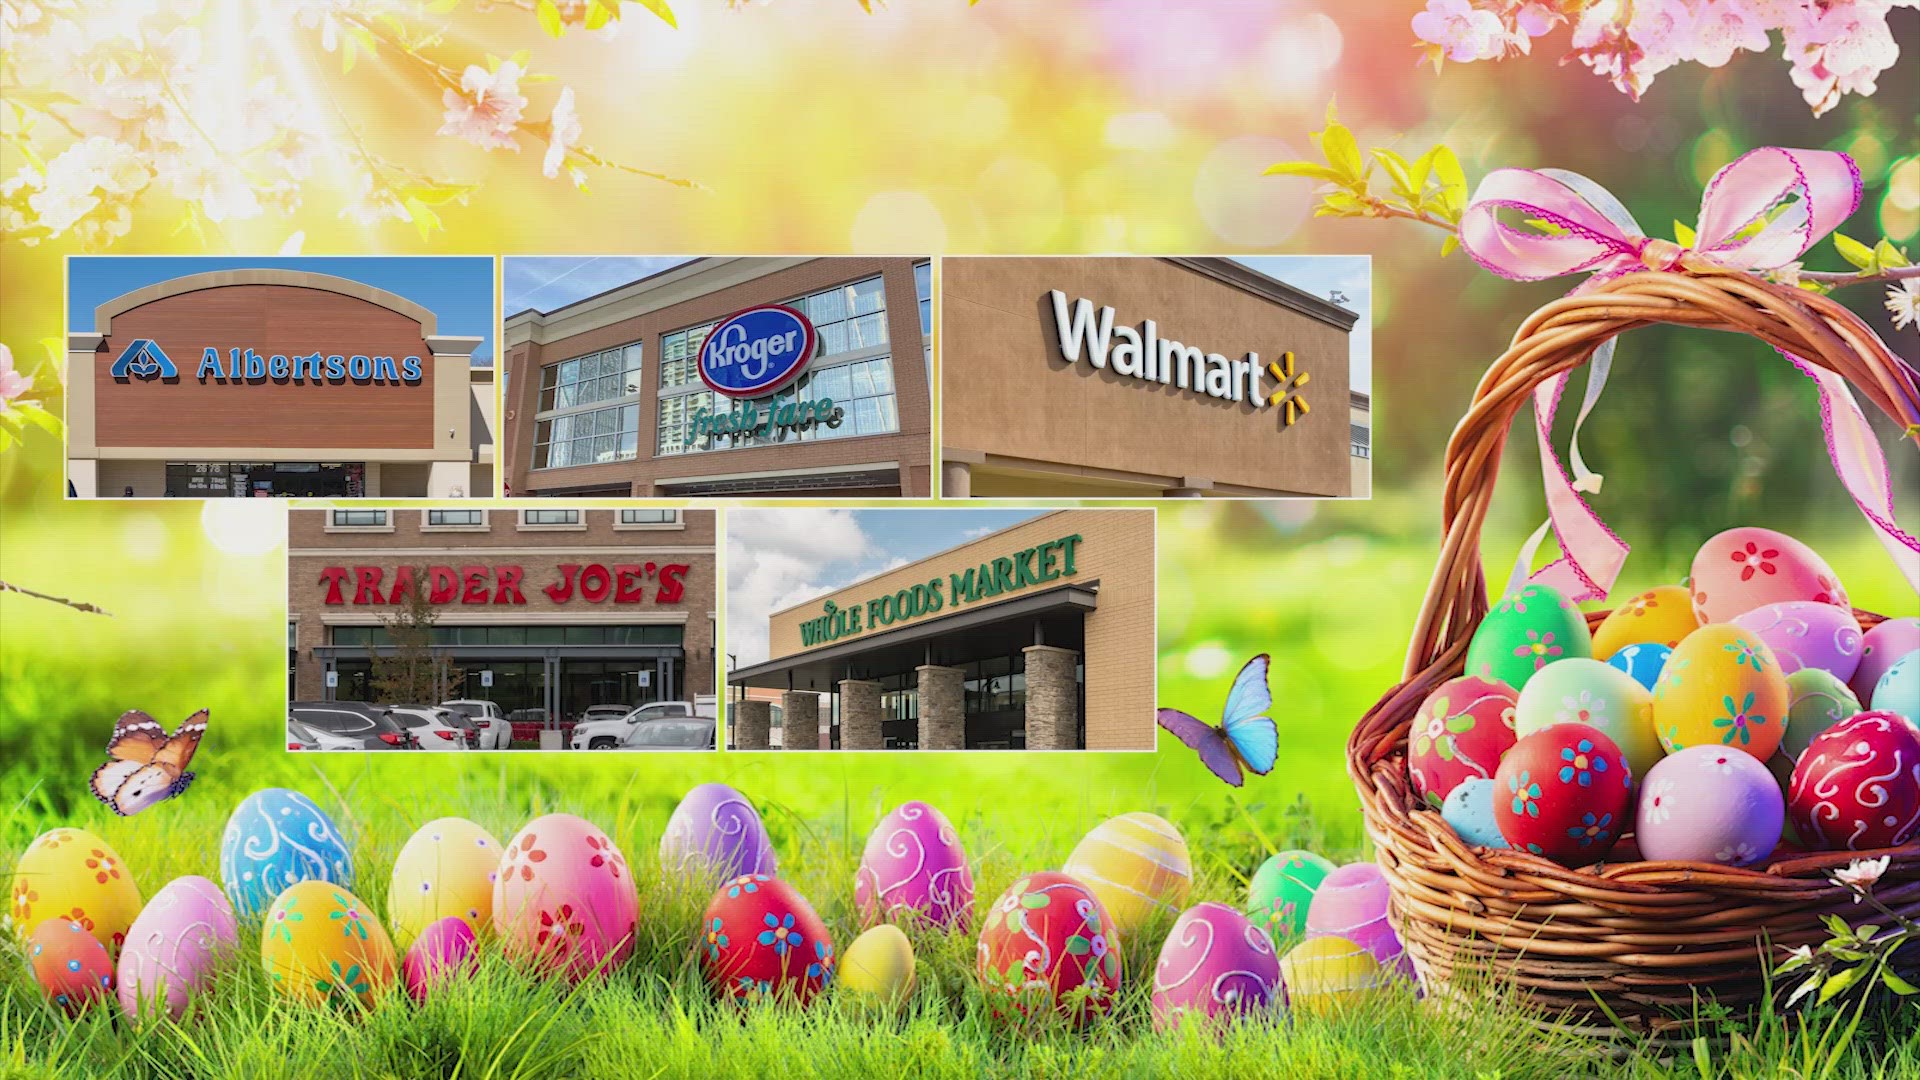 While a lot stores will be closed for the Easter holiday, some chains are still open for your last-minute shopping.